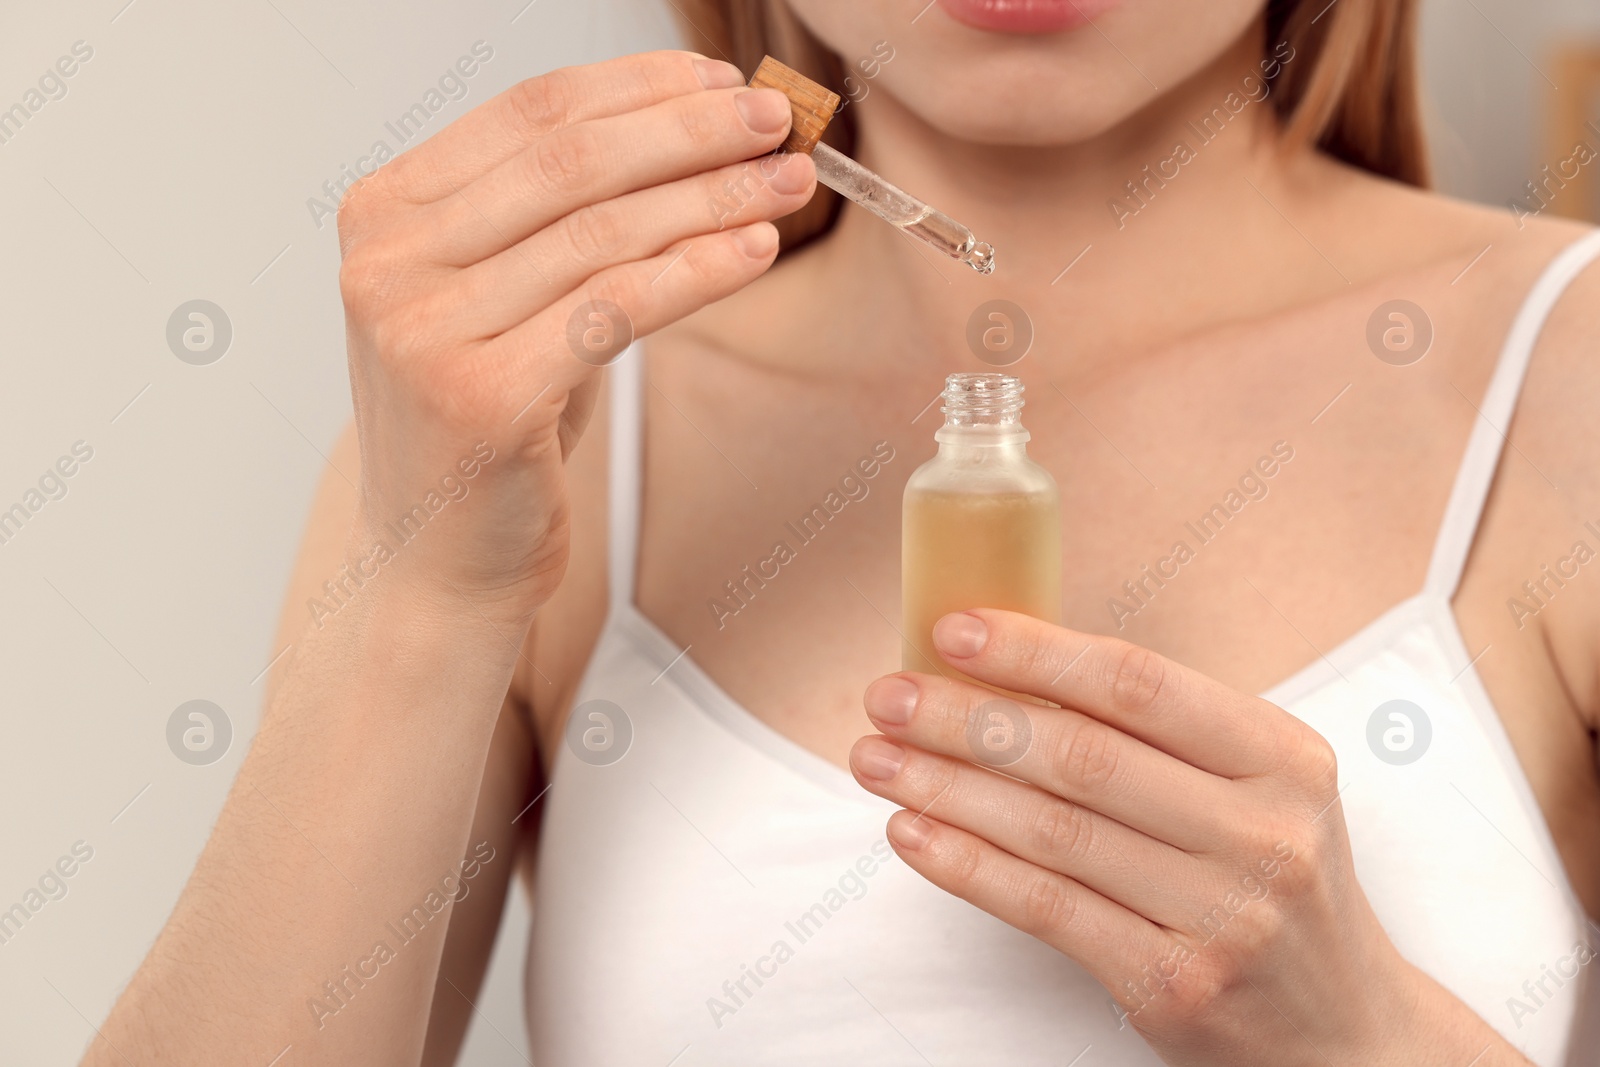 Photo of Woman with bottle of essential oil on blurred background, closeup